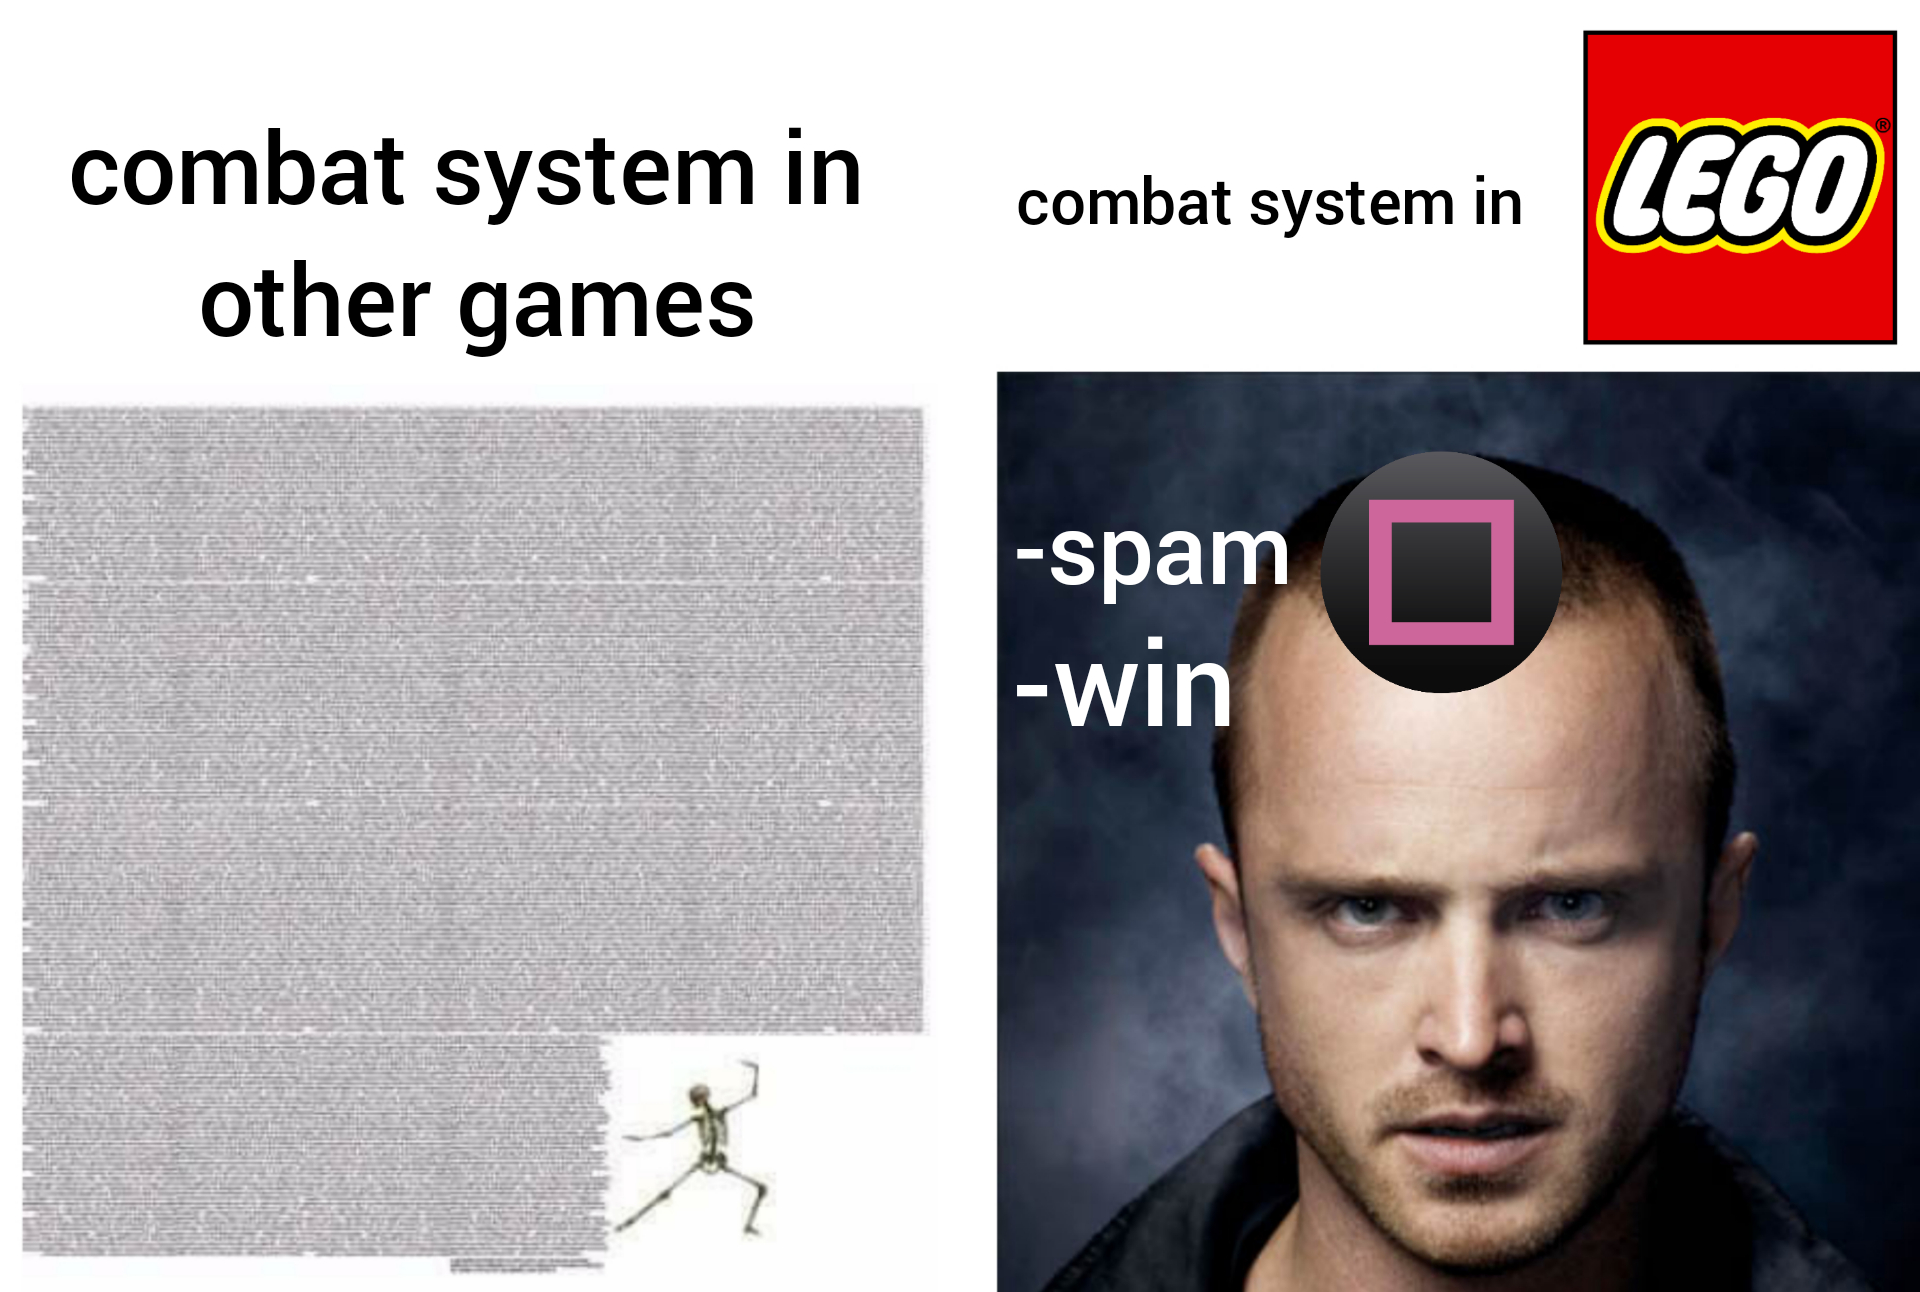 gaming memes - viktor troicki aaron paul - combat system in combat system in Lego other games spam win